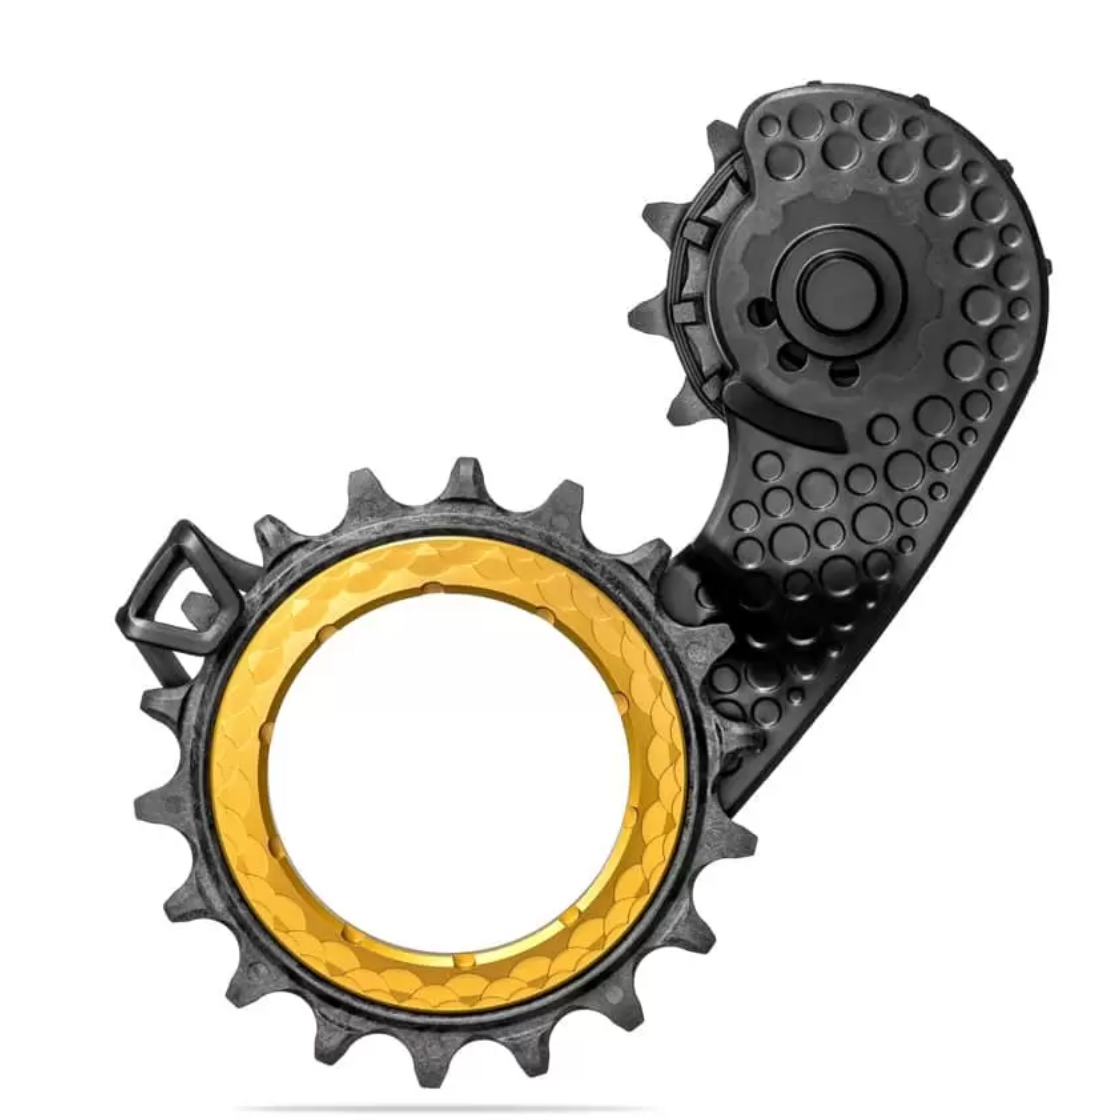 Absolute Black Carbon-Ceramic Hollow Cage, Shimano - Gold 